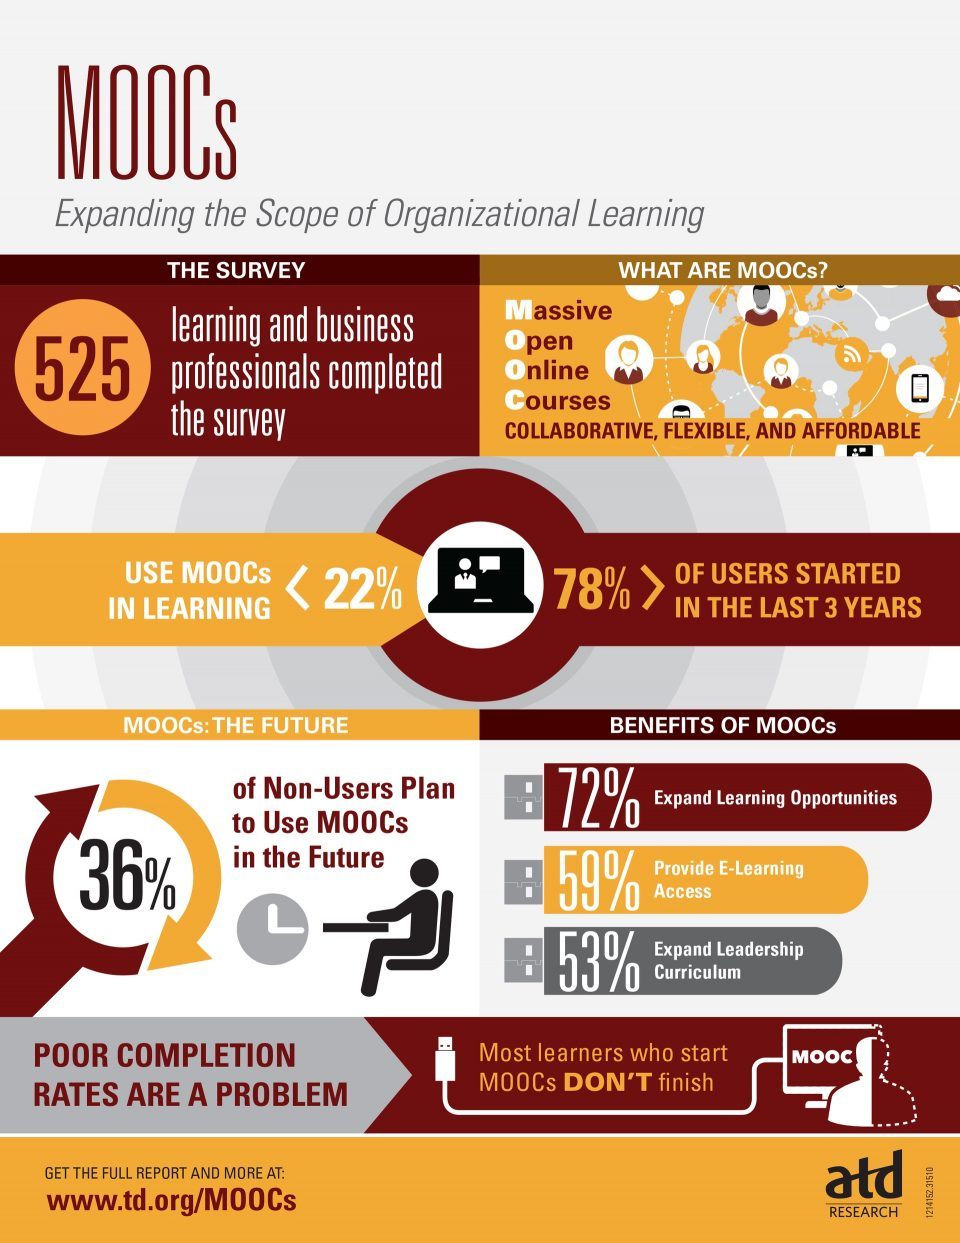 MOOCs: Expanding the Scope of Organizational Learning Infographic